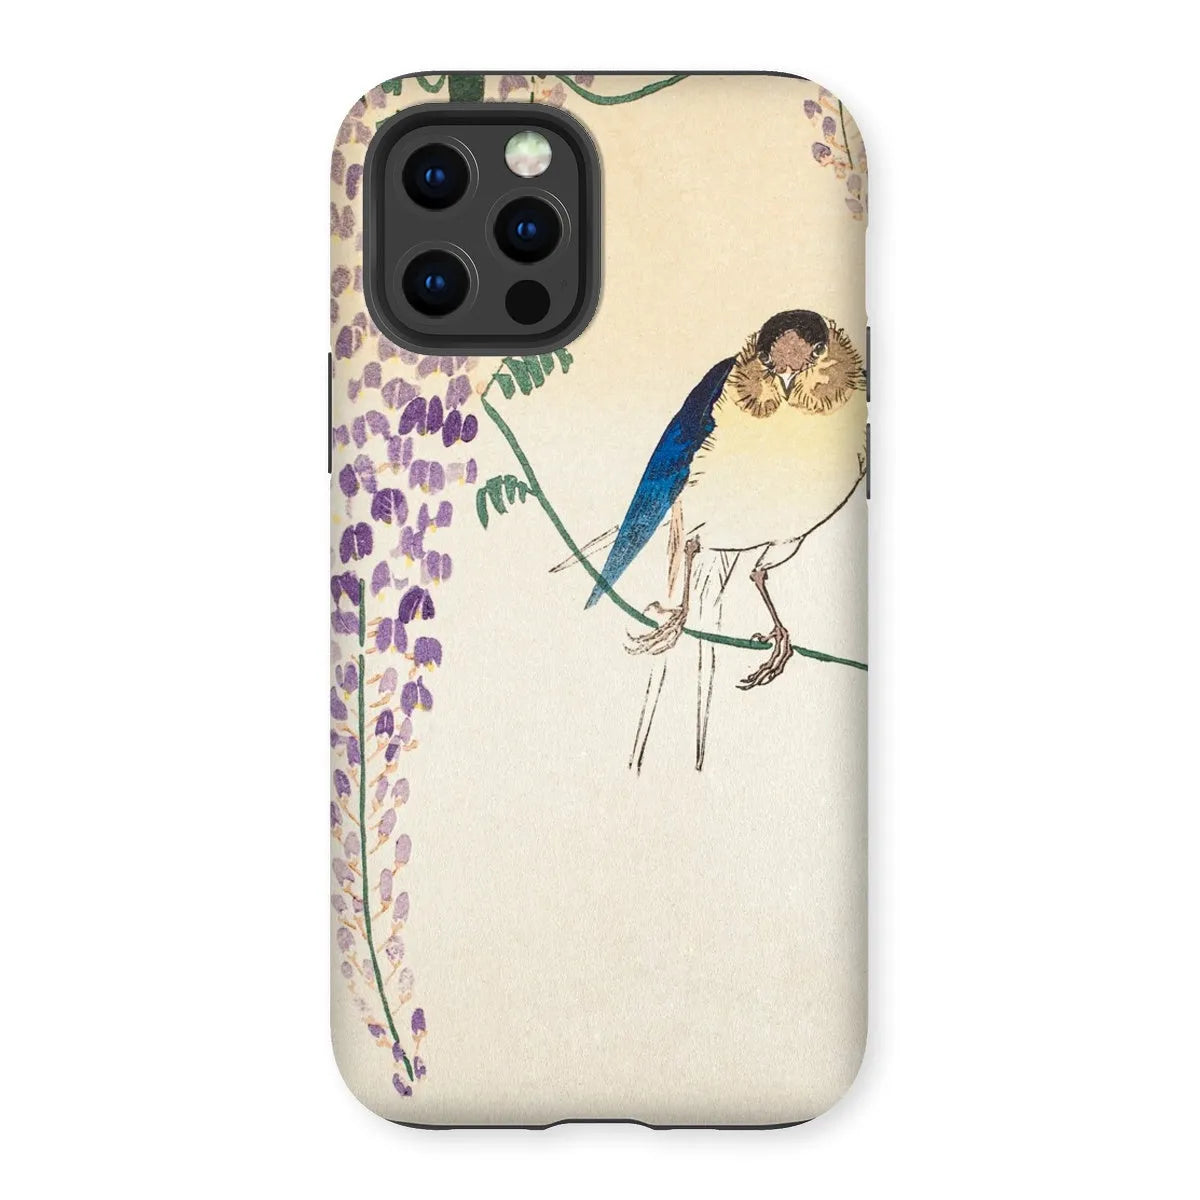 Wisteria And Swallow - Japanese Art Phone Case - Ohara Koson - Iphone 12 Pro / Matte - Mobile Phone Cases - Aesthetic